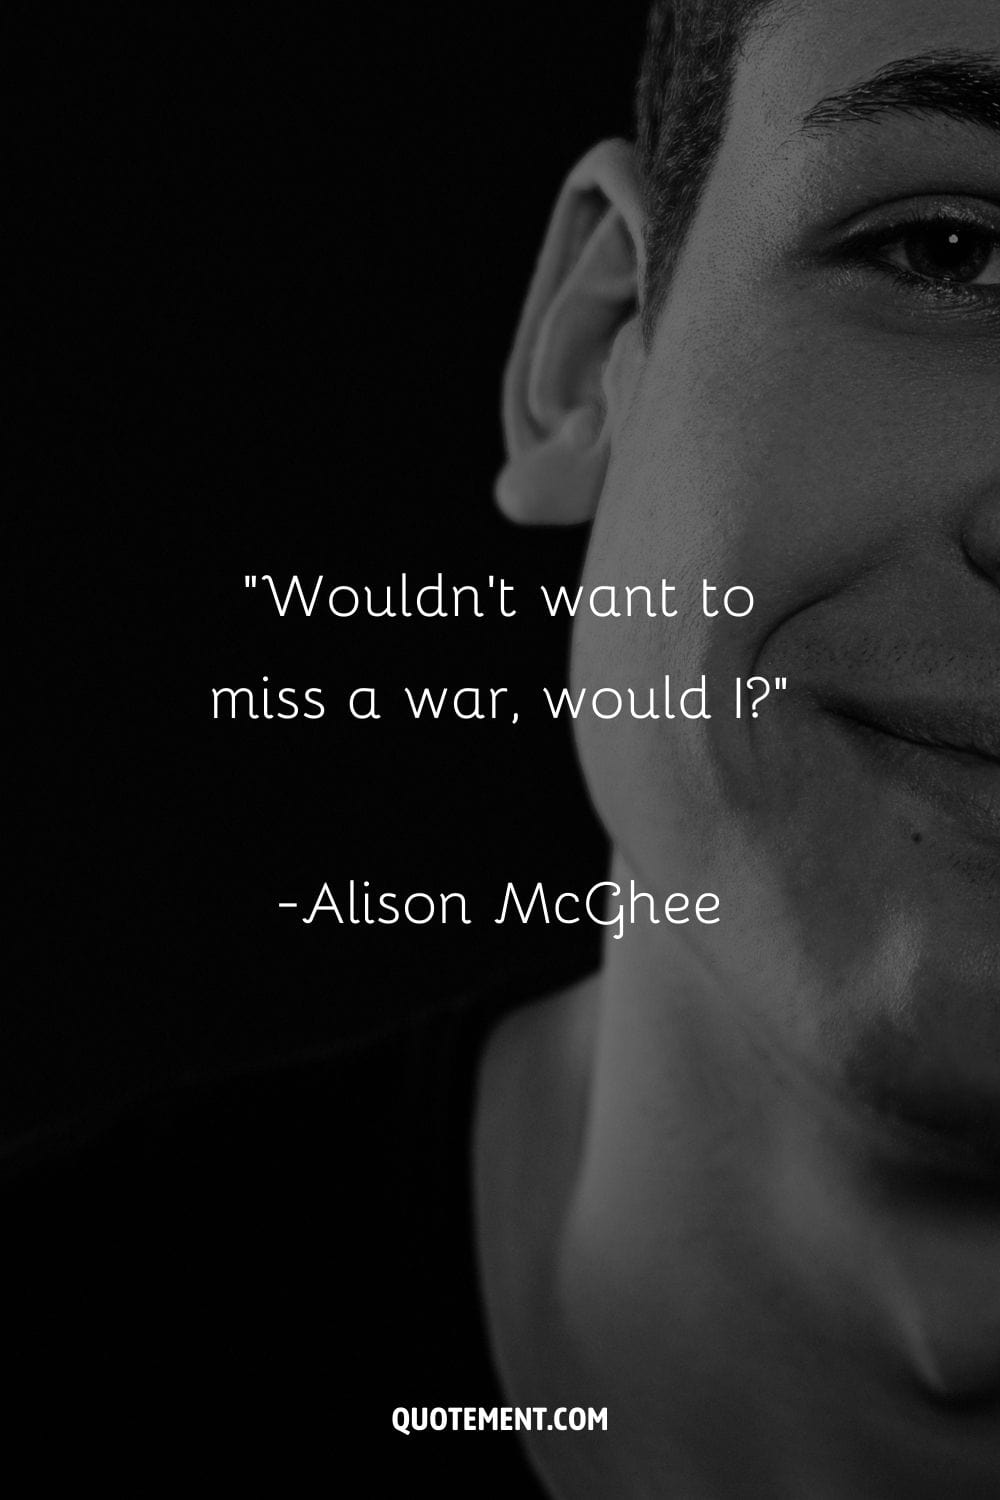 “Wouldn't want to miss a war, would I” ― Alison McGhee, All Rivers Flow to the Sea